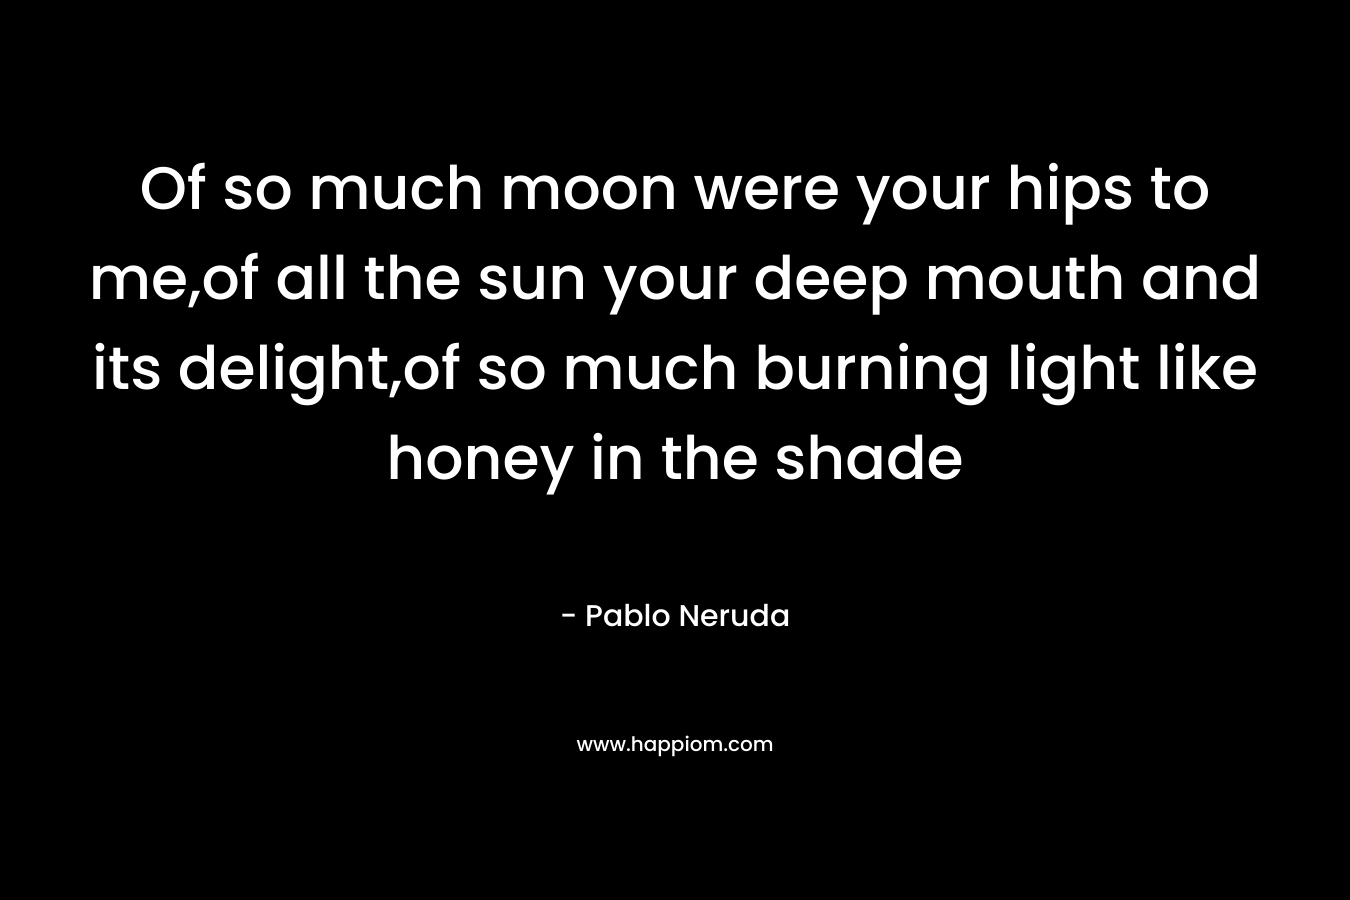 Of so much moon were your hips to me,of all the sun your deep mouth and its delight,of so much burning light like honey in the shade